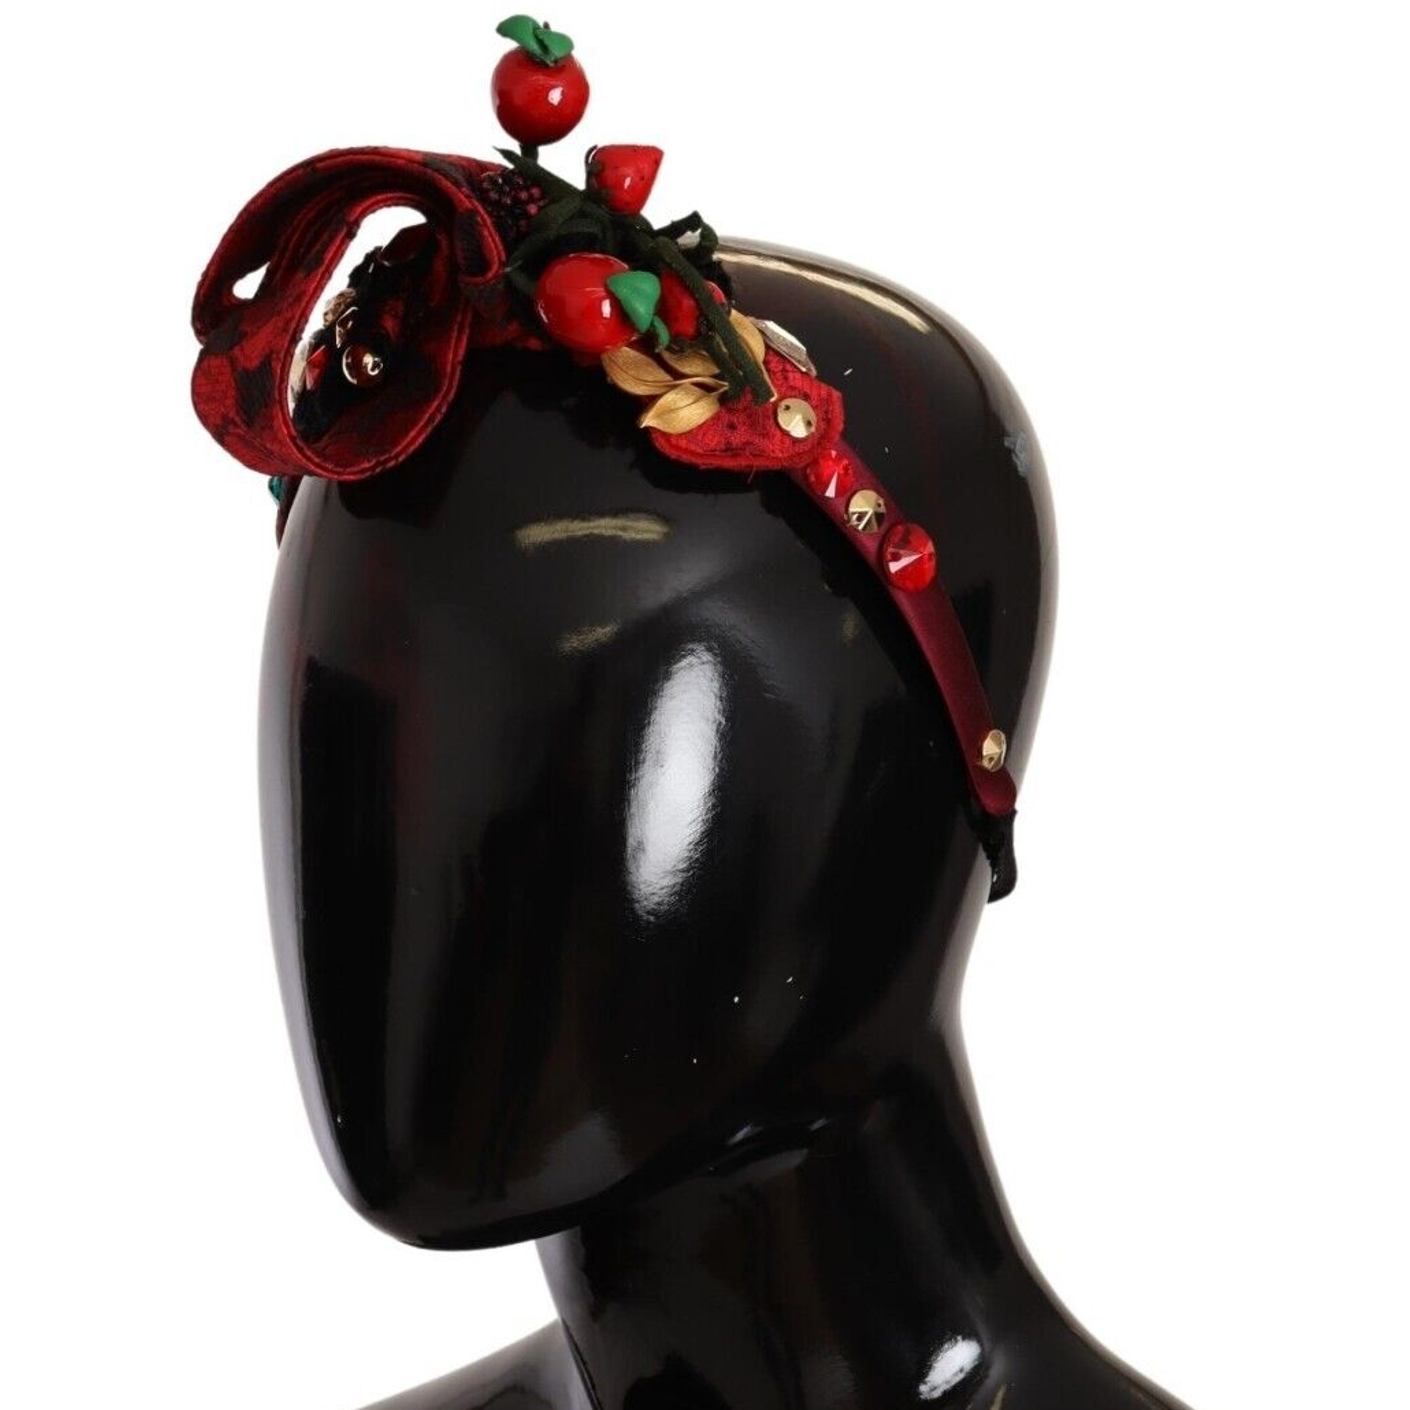 Dolce & Gabbana Exquisite Berry Crystal Embellished Diadem red-tiara-berry-fruit-crystal-bow-hair-diadem-headband s-l1600-5-96884f92-0d2.png